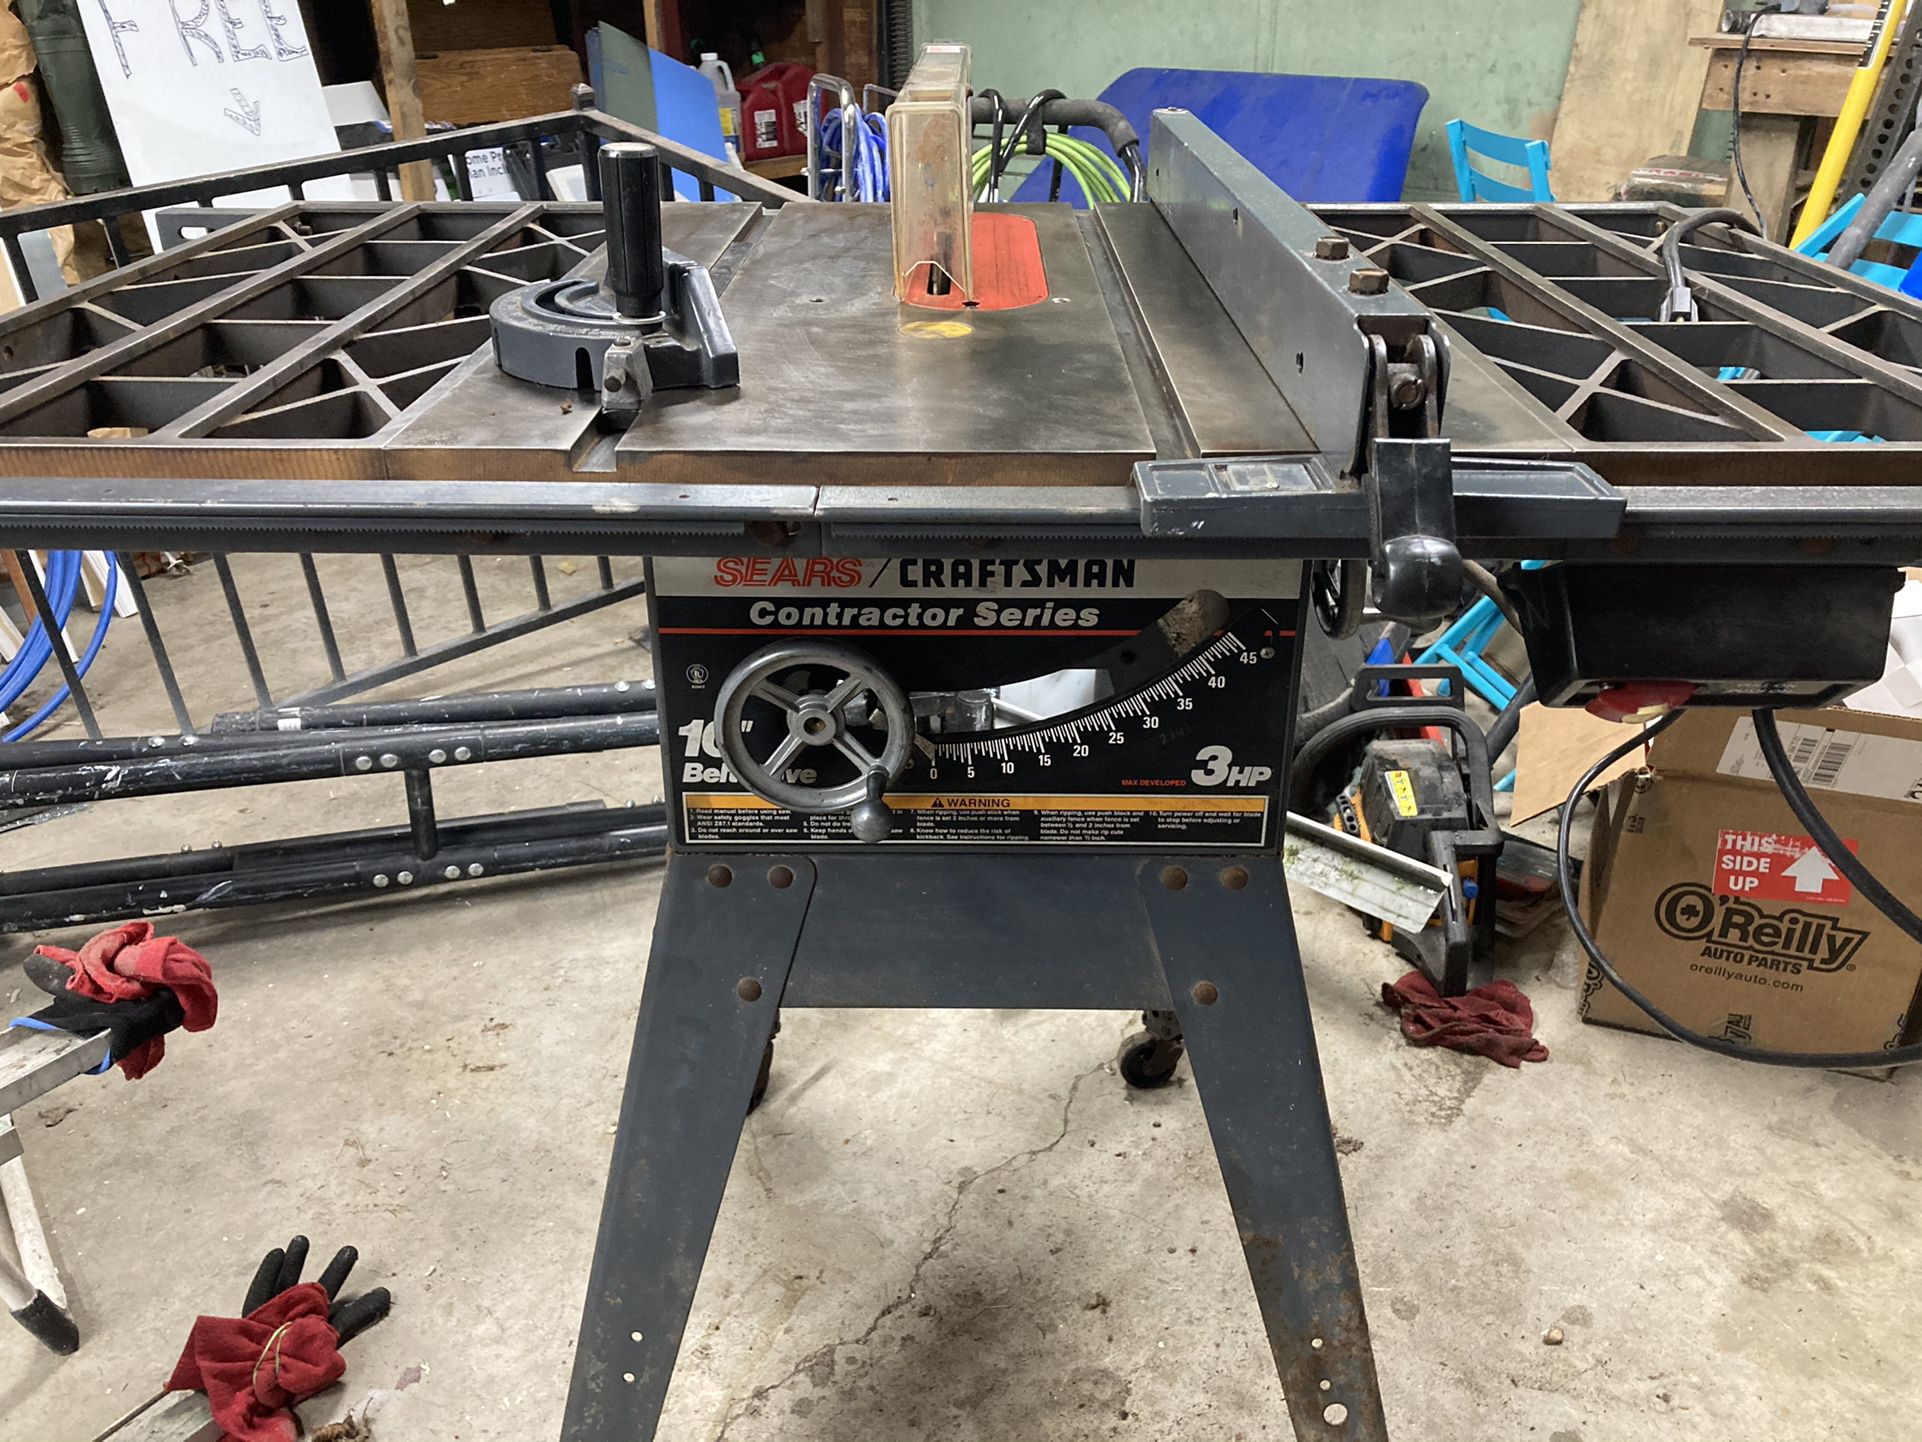 Craftsmen Sears 3 HP Contractor Series Table Saw